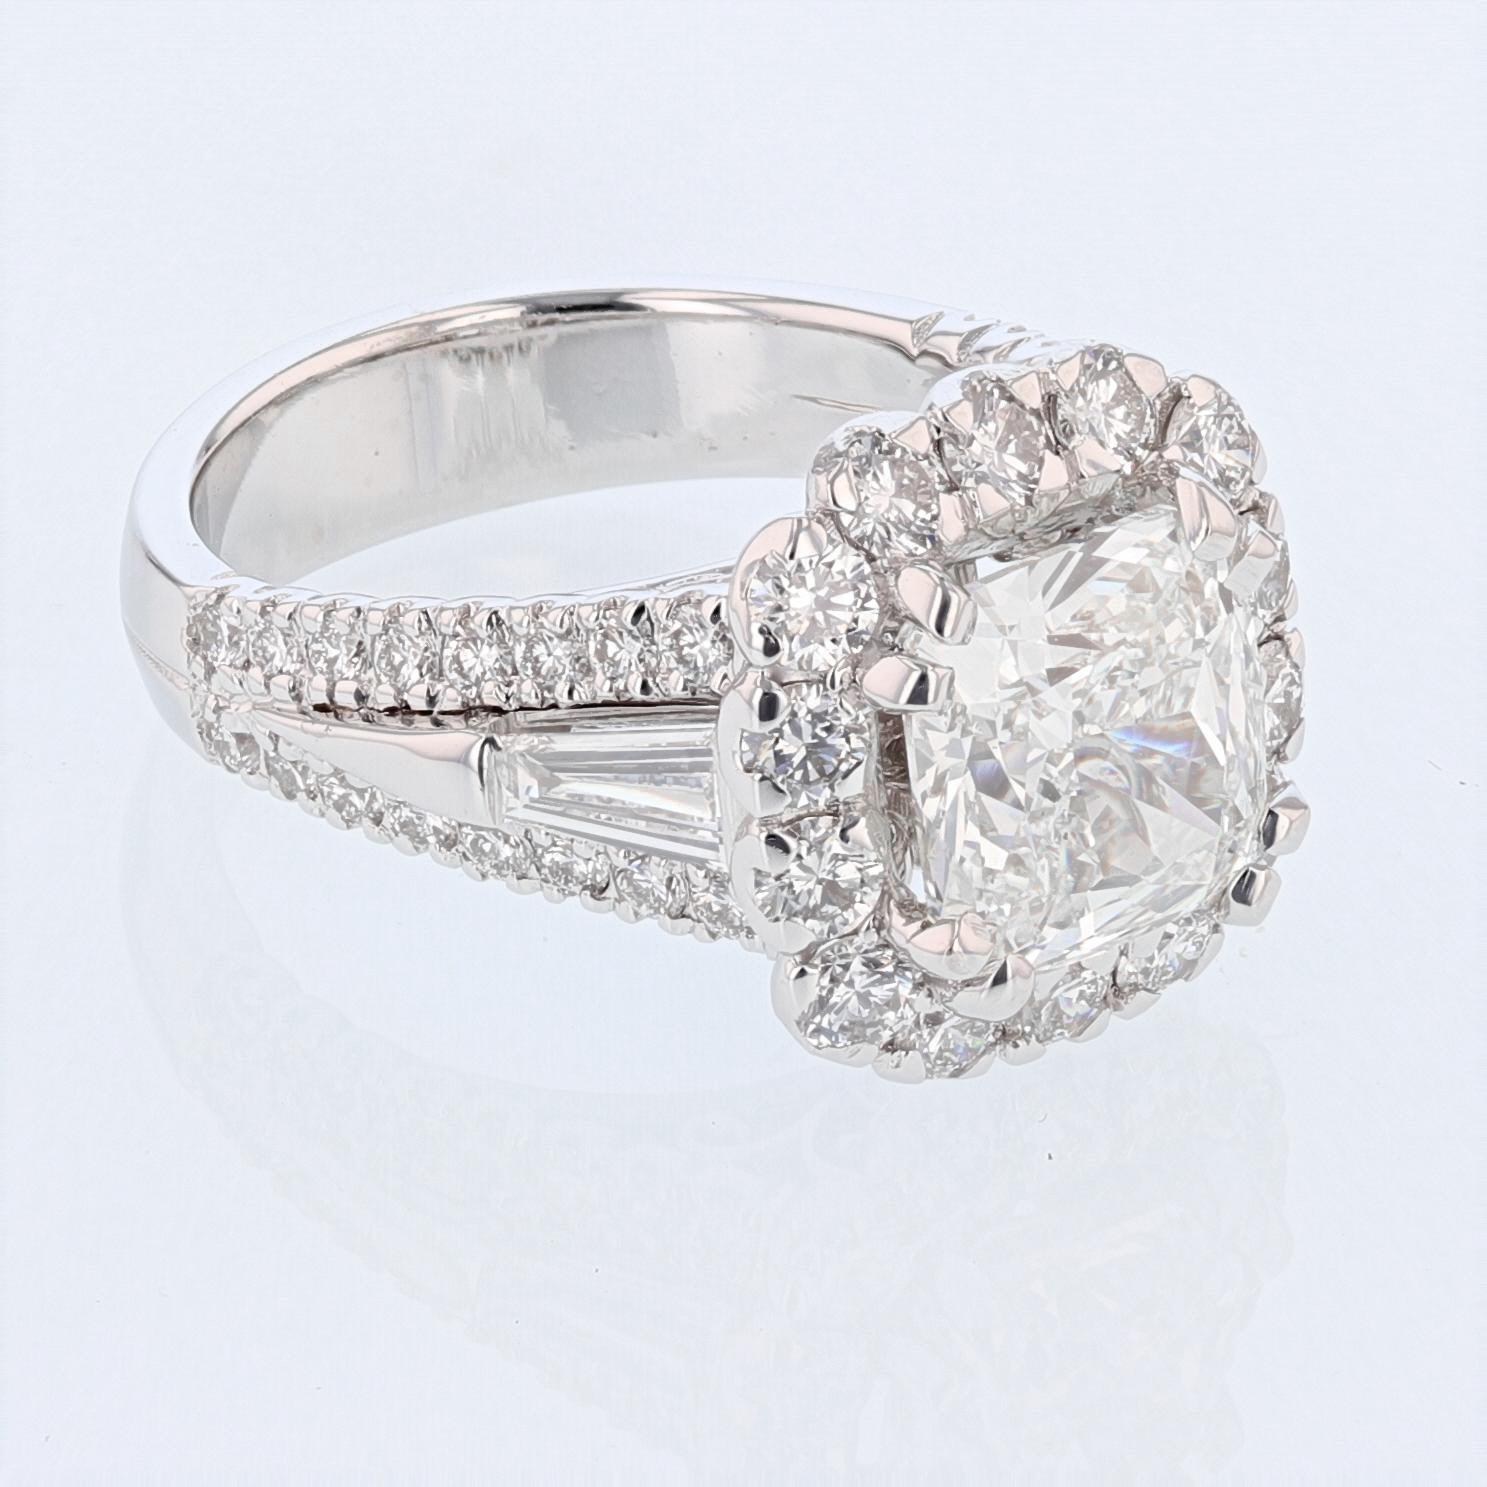 This ring is made in 14K white gold featuring a 3.66ct GIA certified cushion cut diamond weighing 3.66ct. color grade (J) clarity grade (VS1). Certificate number is GIA 210537647. The ring features 49 round cut diamonds weighing 1.67ct color grade